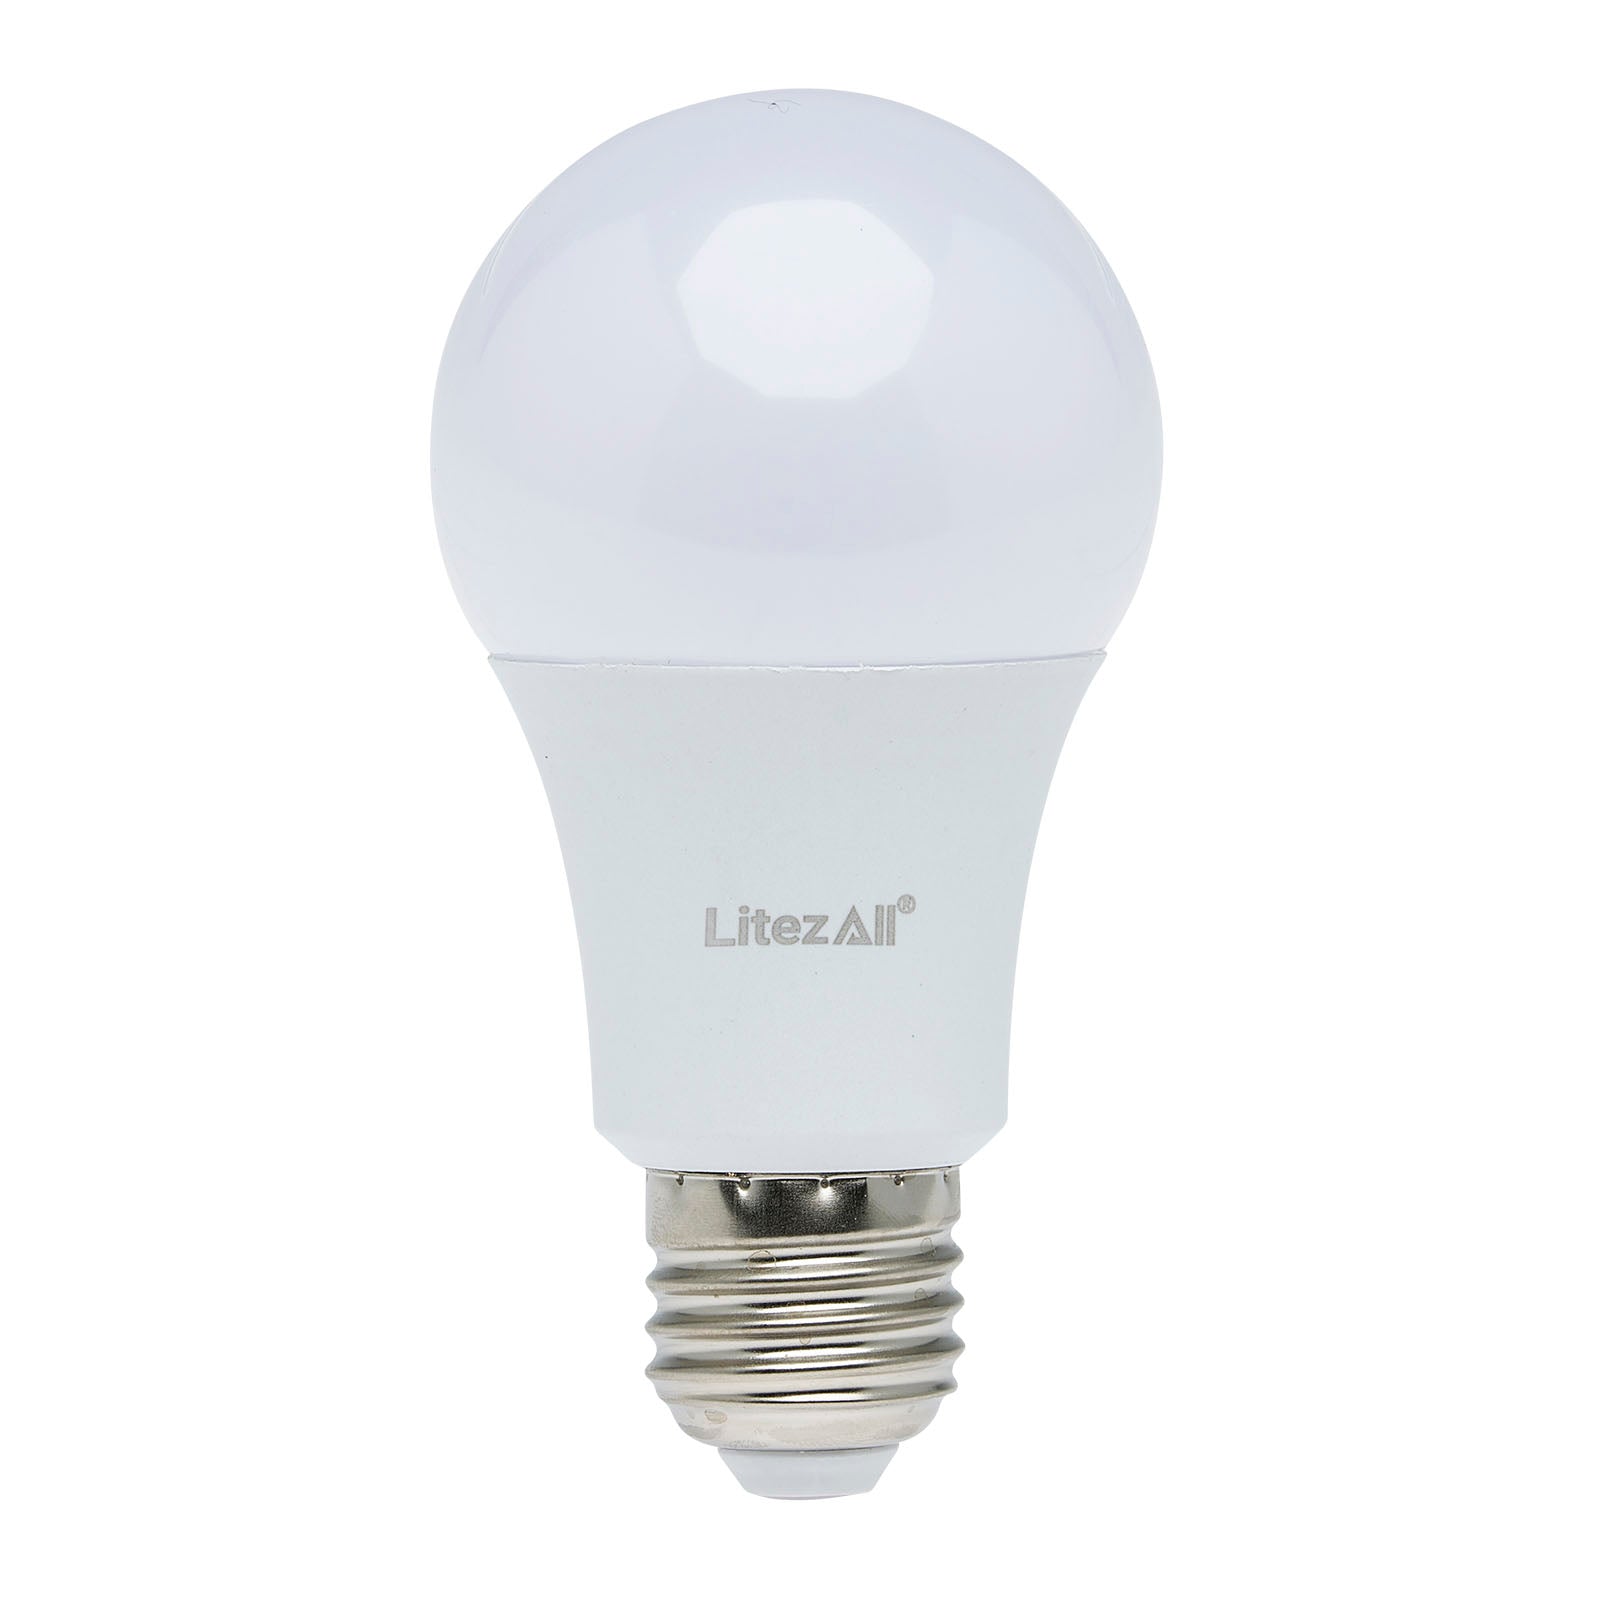 LitezAll LED Color Changing Light Bulb with Remote - LitezAll - Home Accents - 2